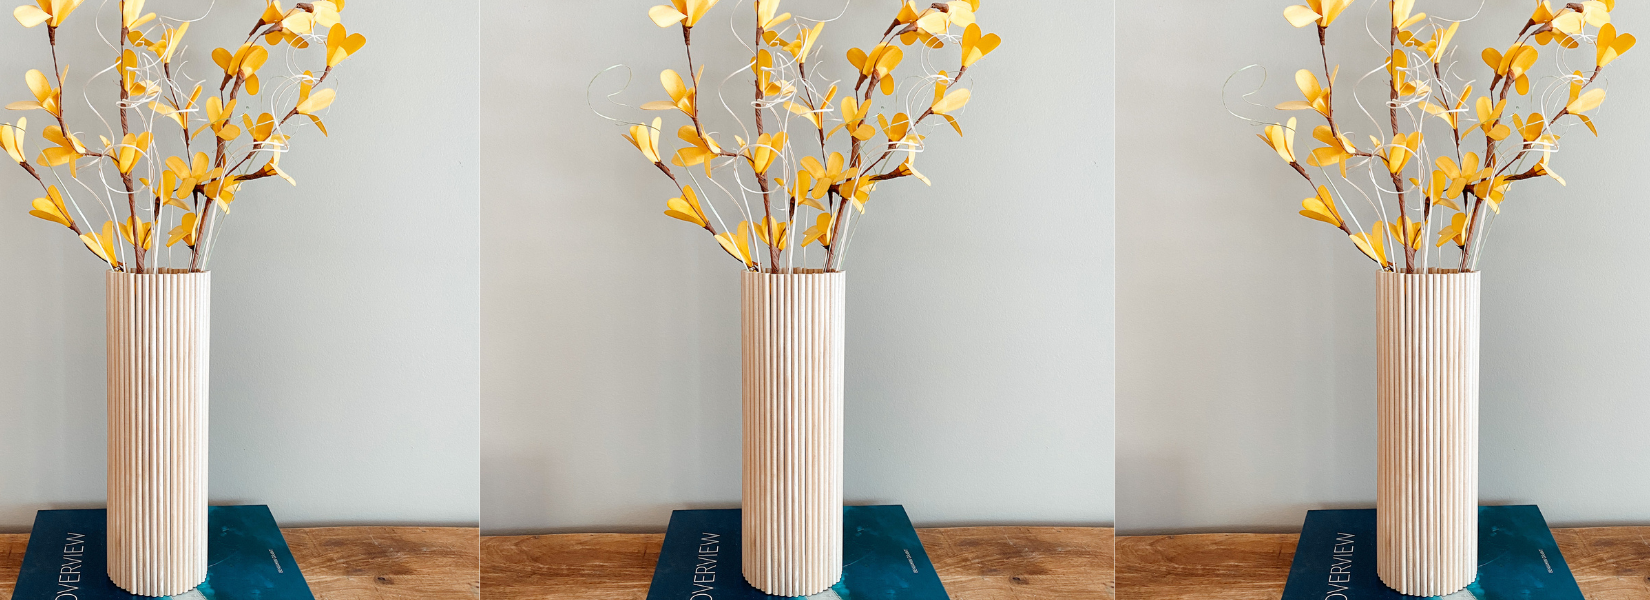 How to Make a DIY Wood Vase from Dollar Tree Items